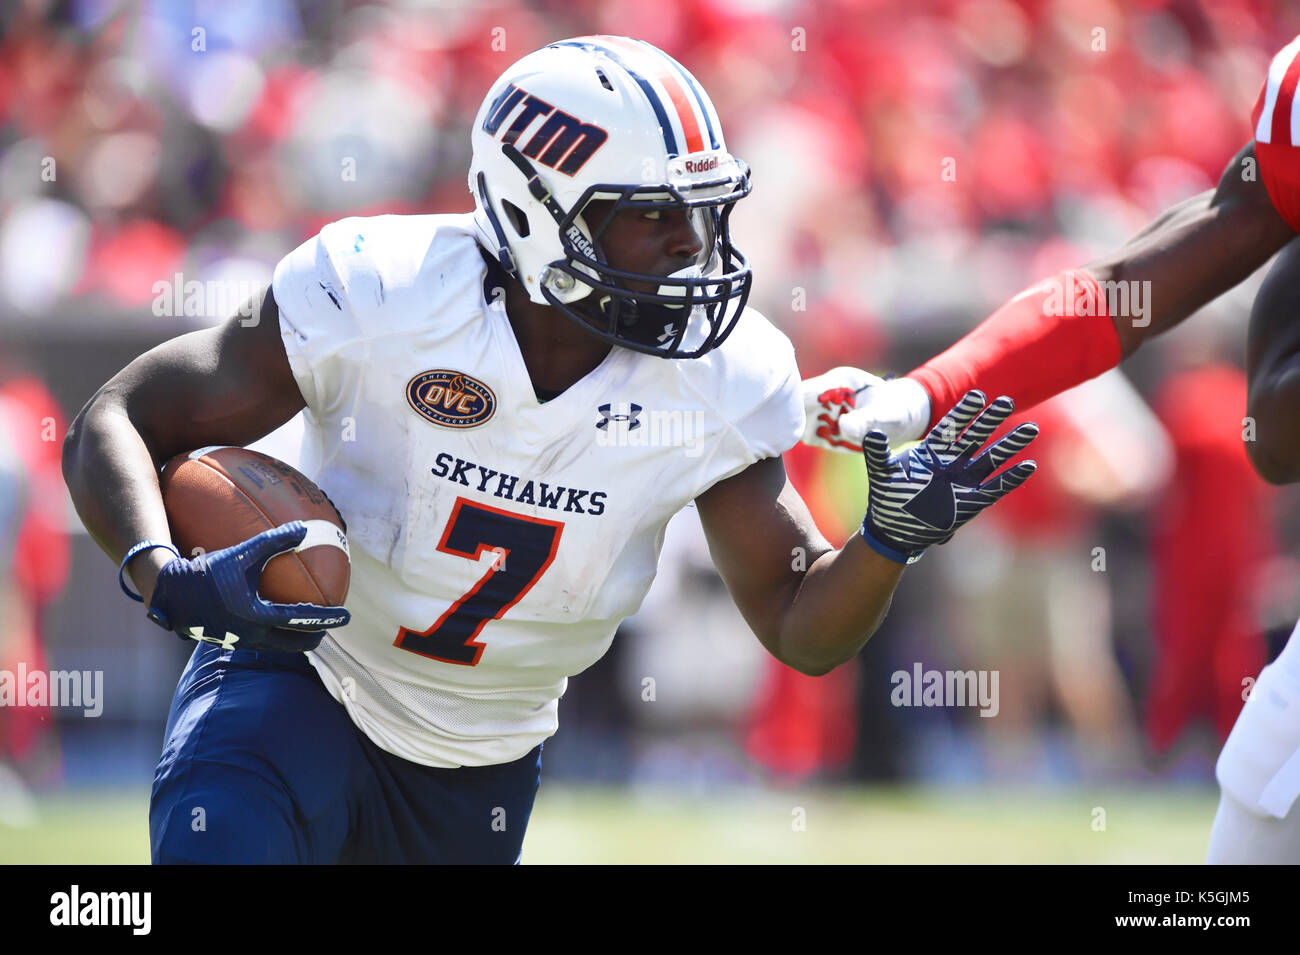 Halftime. 9th Sep, 2017. Tennessee-Martin running back Ladarius Galloway turns upfield during the second quarter of a NCAA college football game against Mississippi at Vaught-Hemmingway Stadium in Oxford, MS. Mississippi leads 17-16 at halftime. Austin McAfee/CSM/Alamy Live News Stock Photo